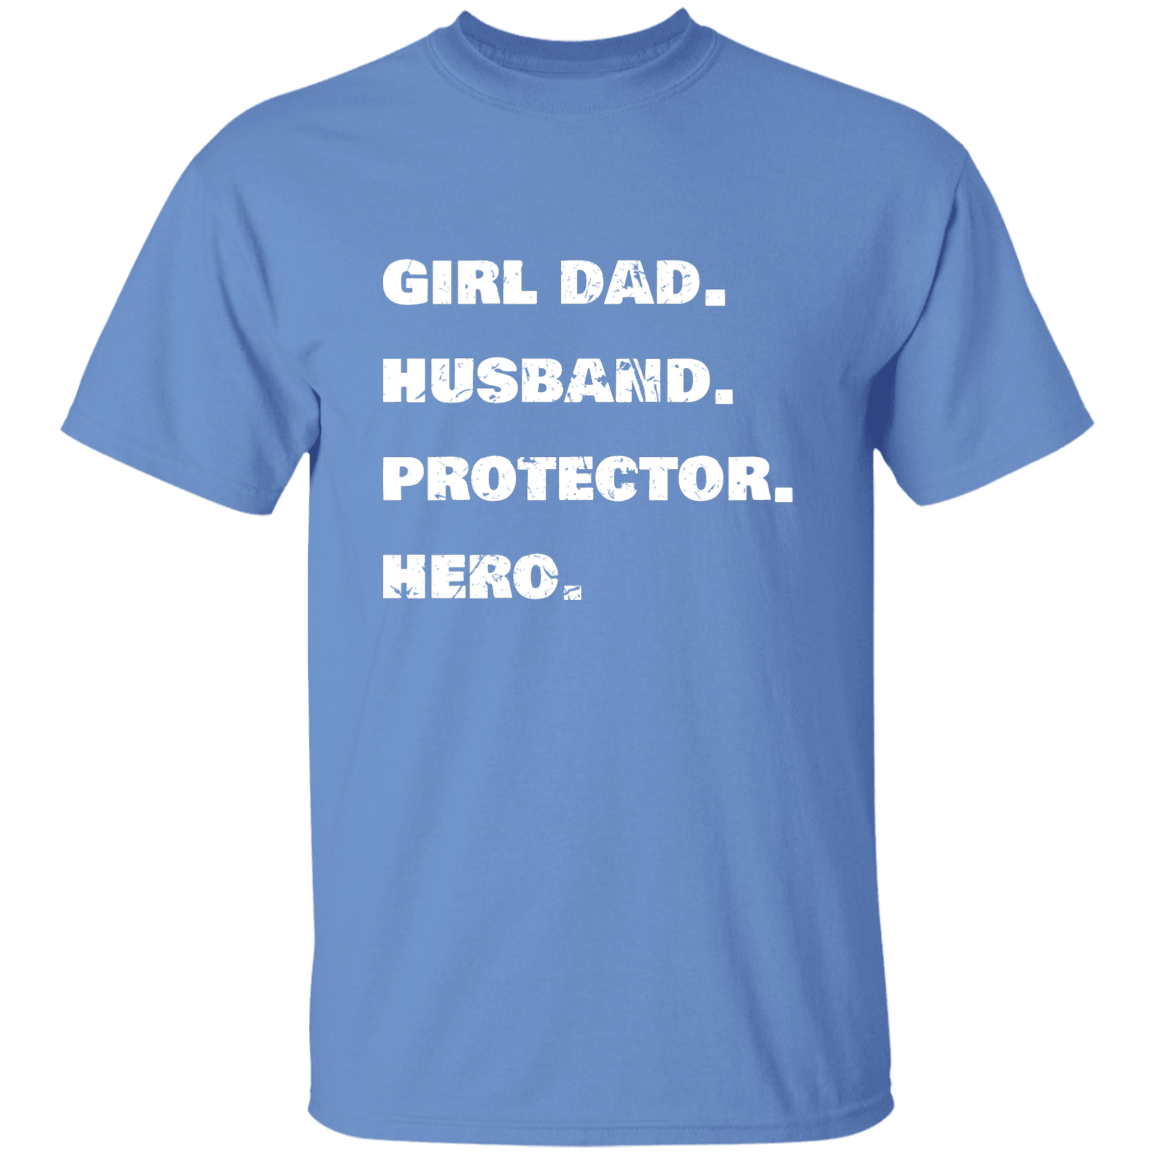 Girl Dad. Husband. Protector. Hero. | Premium T-Shirt | Perfect Gift For Dad and Husband